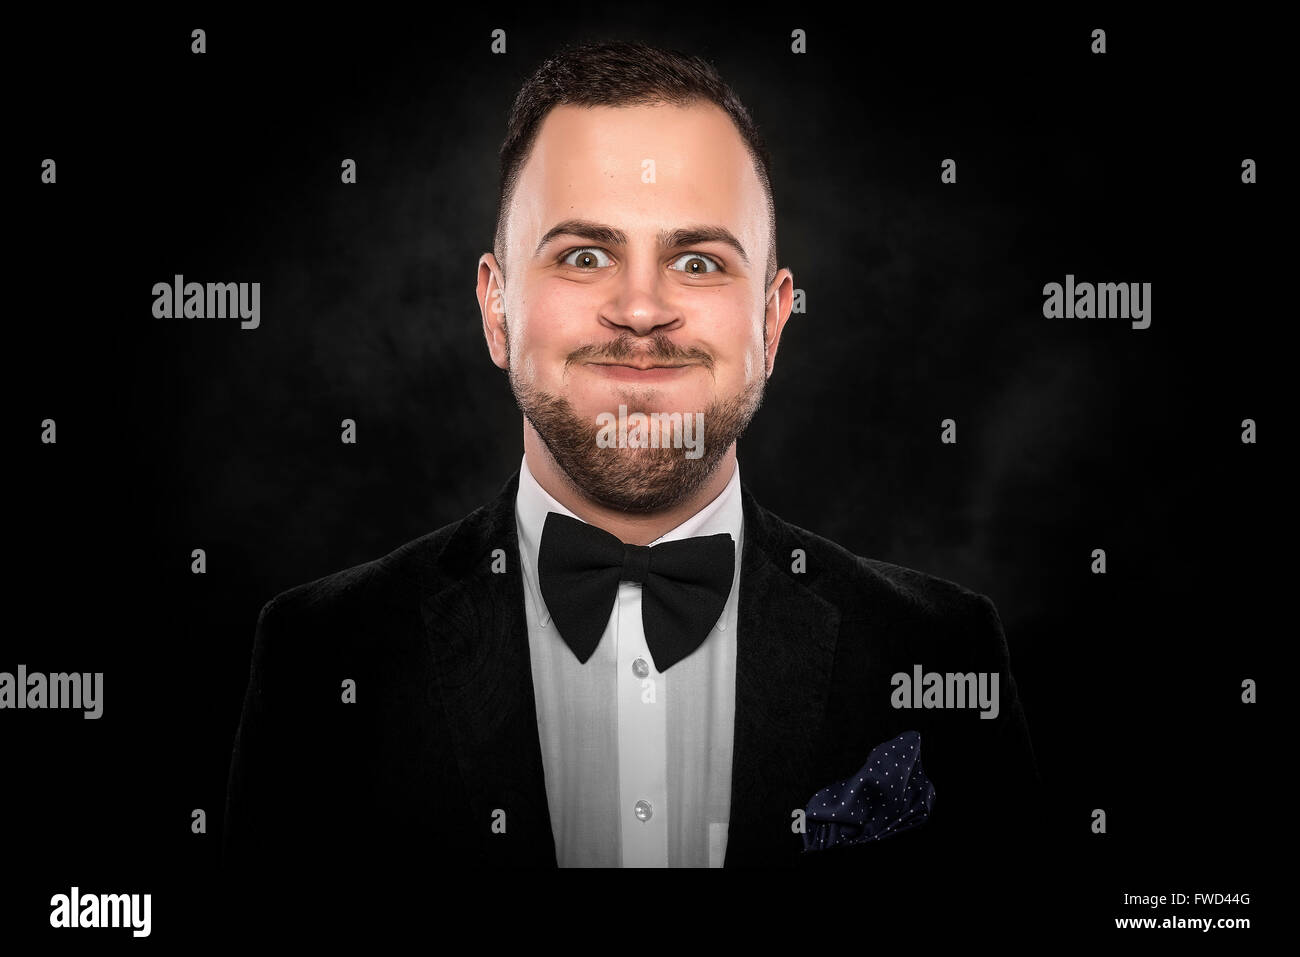 Man in suit makes funny face over dark background Stock Photo